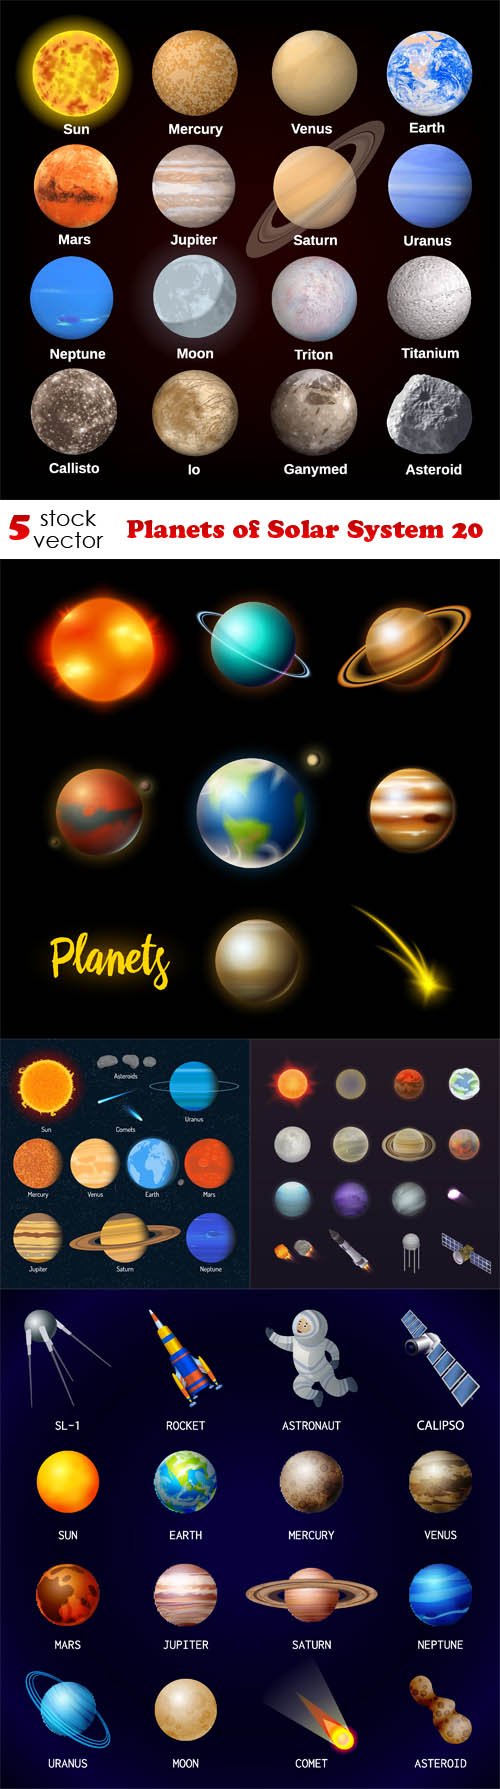 Vectors - Planets of Solar System 20